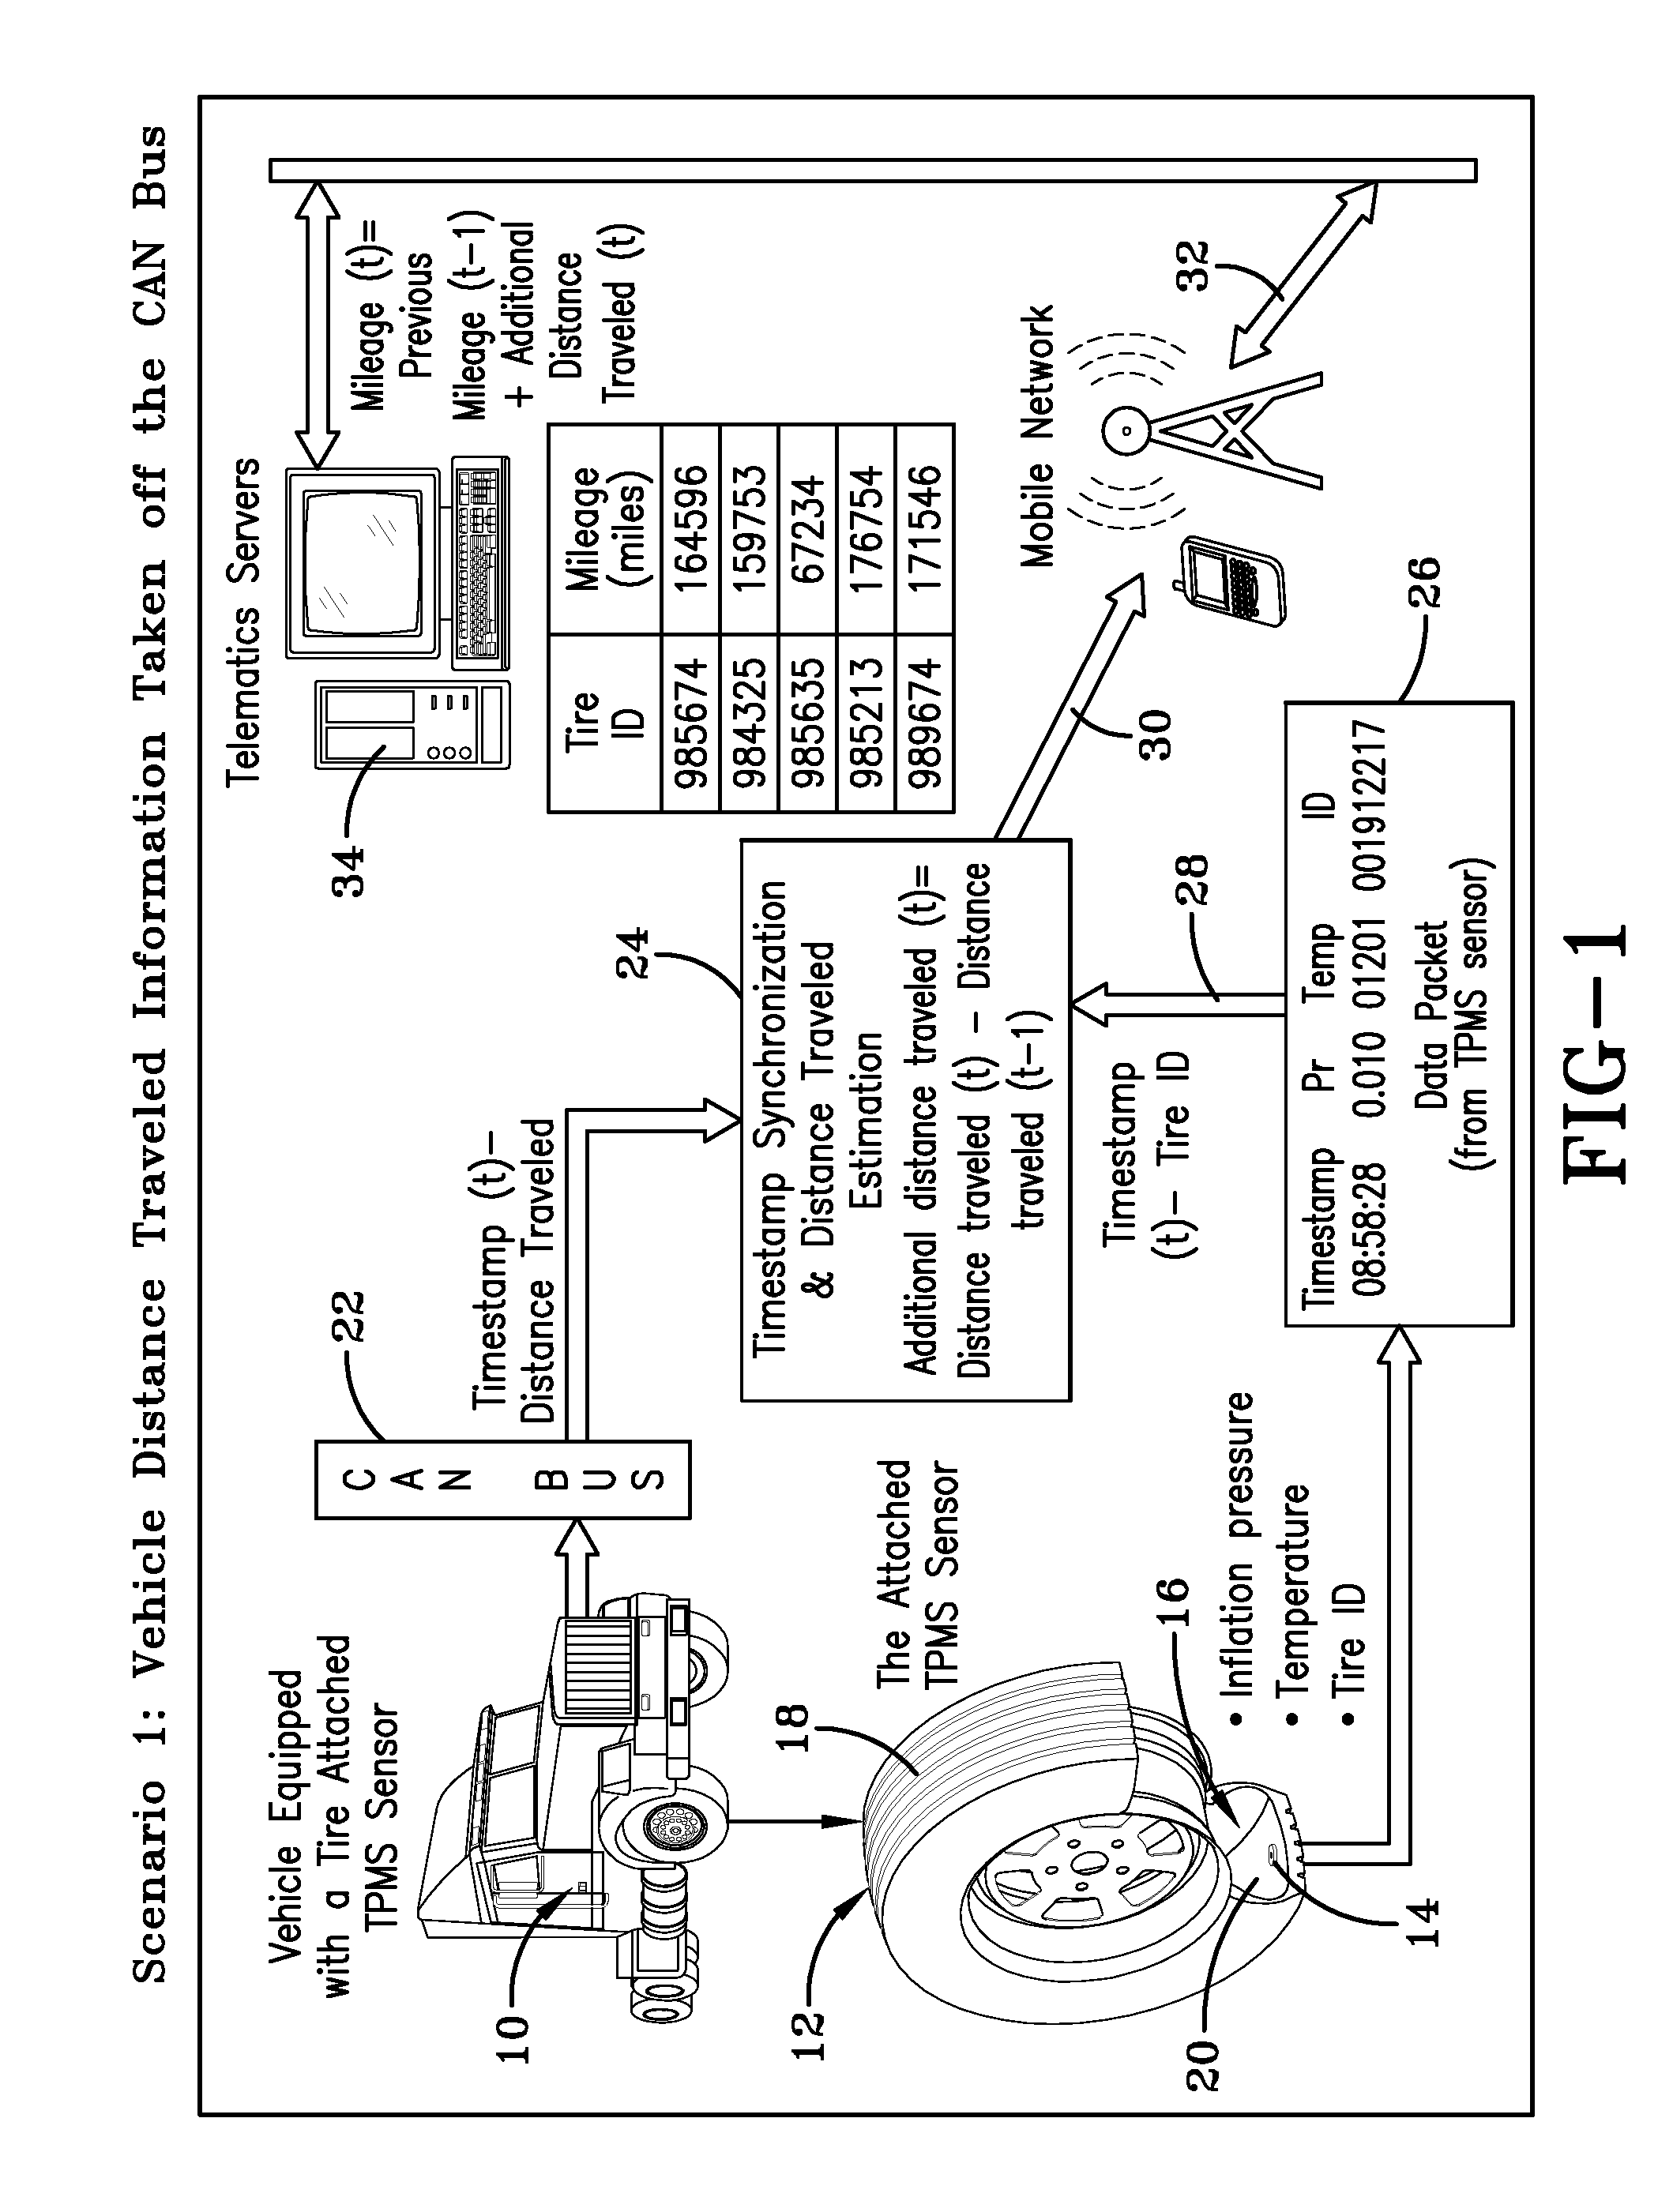 Tire sensor-based mileage tracking system and method